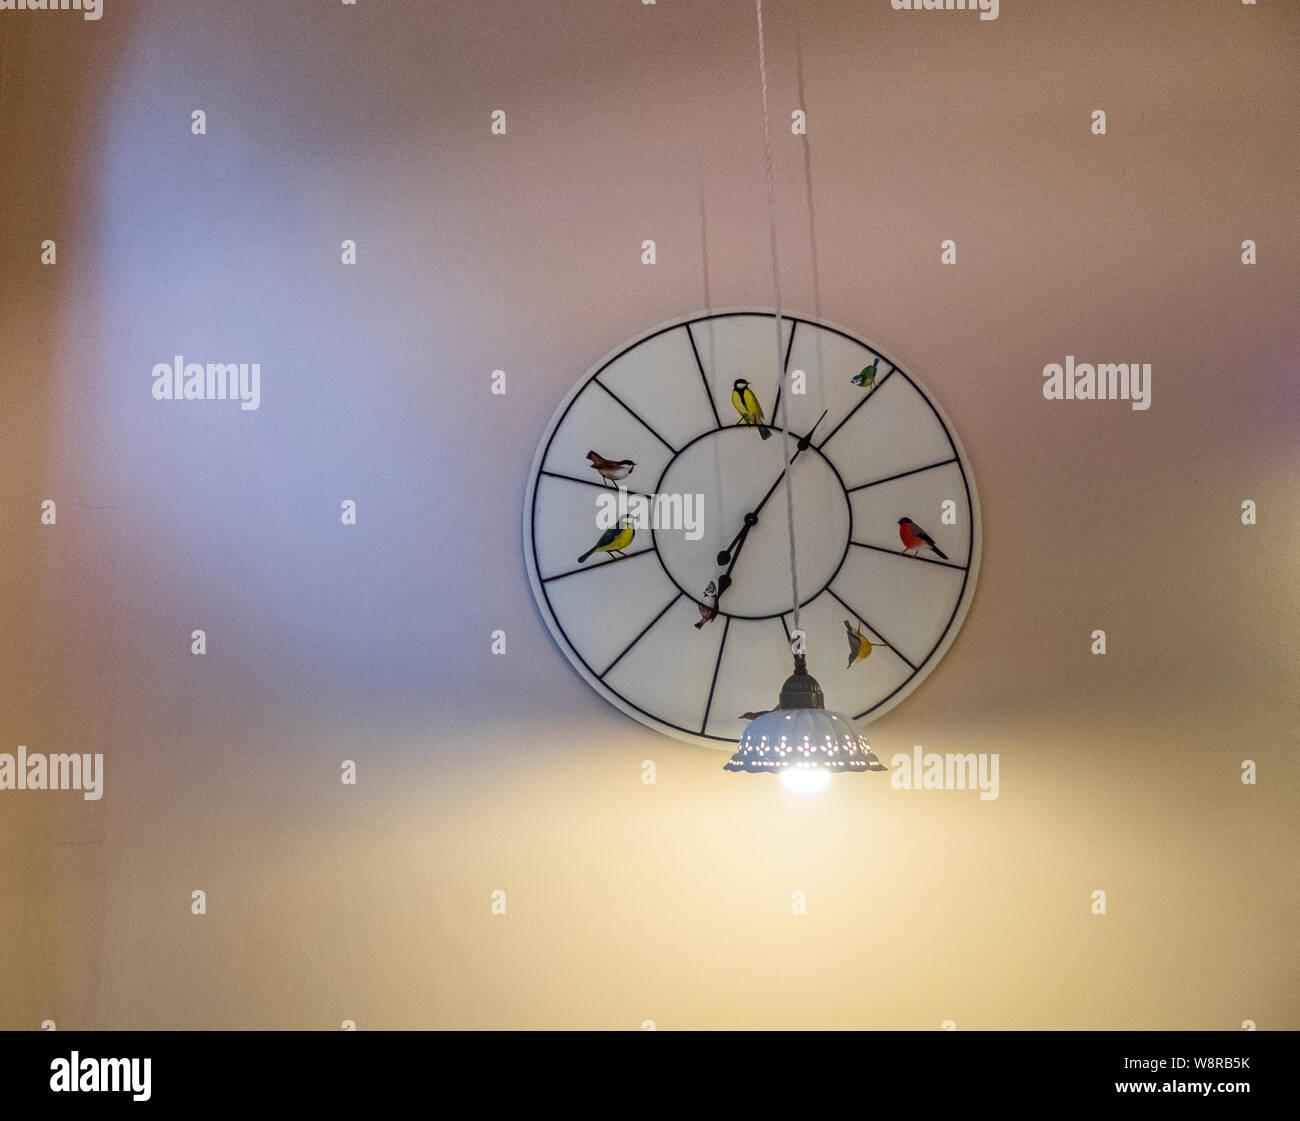 funny clock on the wall with birds on the clock face Stock Photo